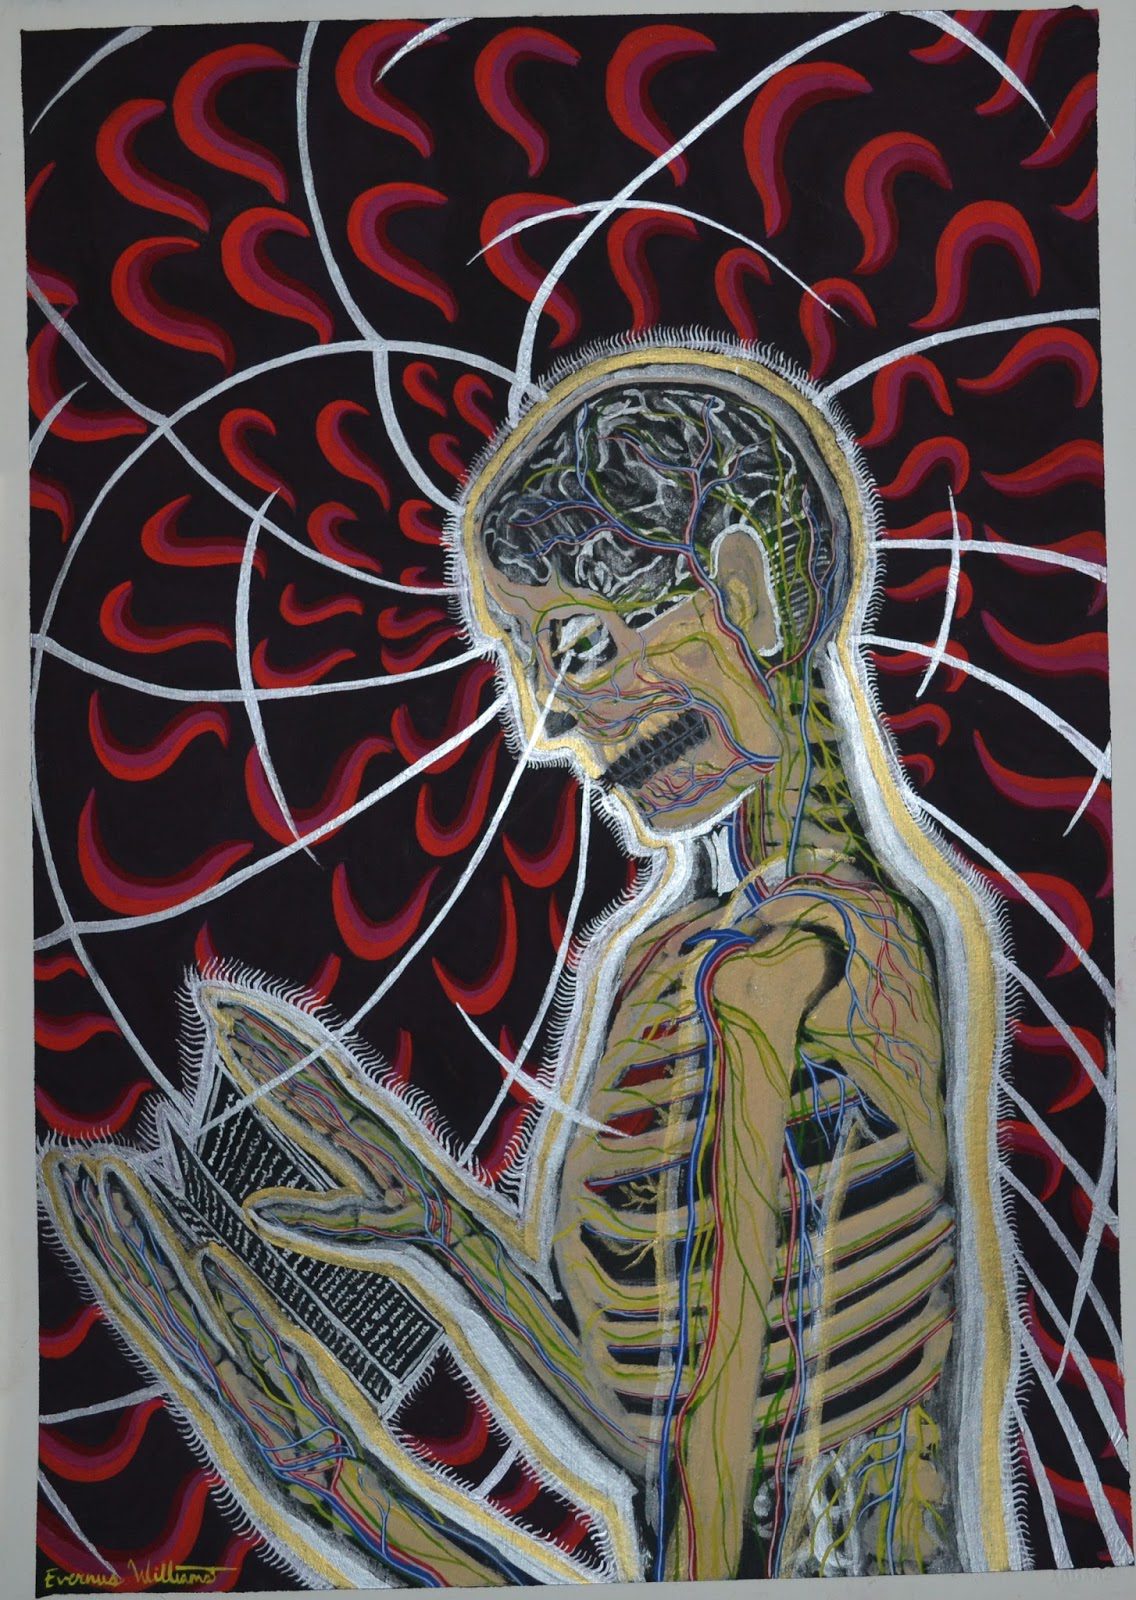 Anatomical side view (skeleton, blood vessels, brain) of person looking down at a book. A white line extends from the eyes and goes down to the book, while other white lines and red curls swirl around the person's head, depicting the wonders of thought and reading. The artist's signature is in the bottom left corner.